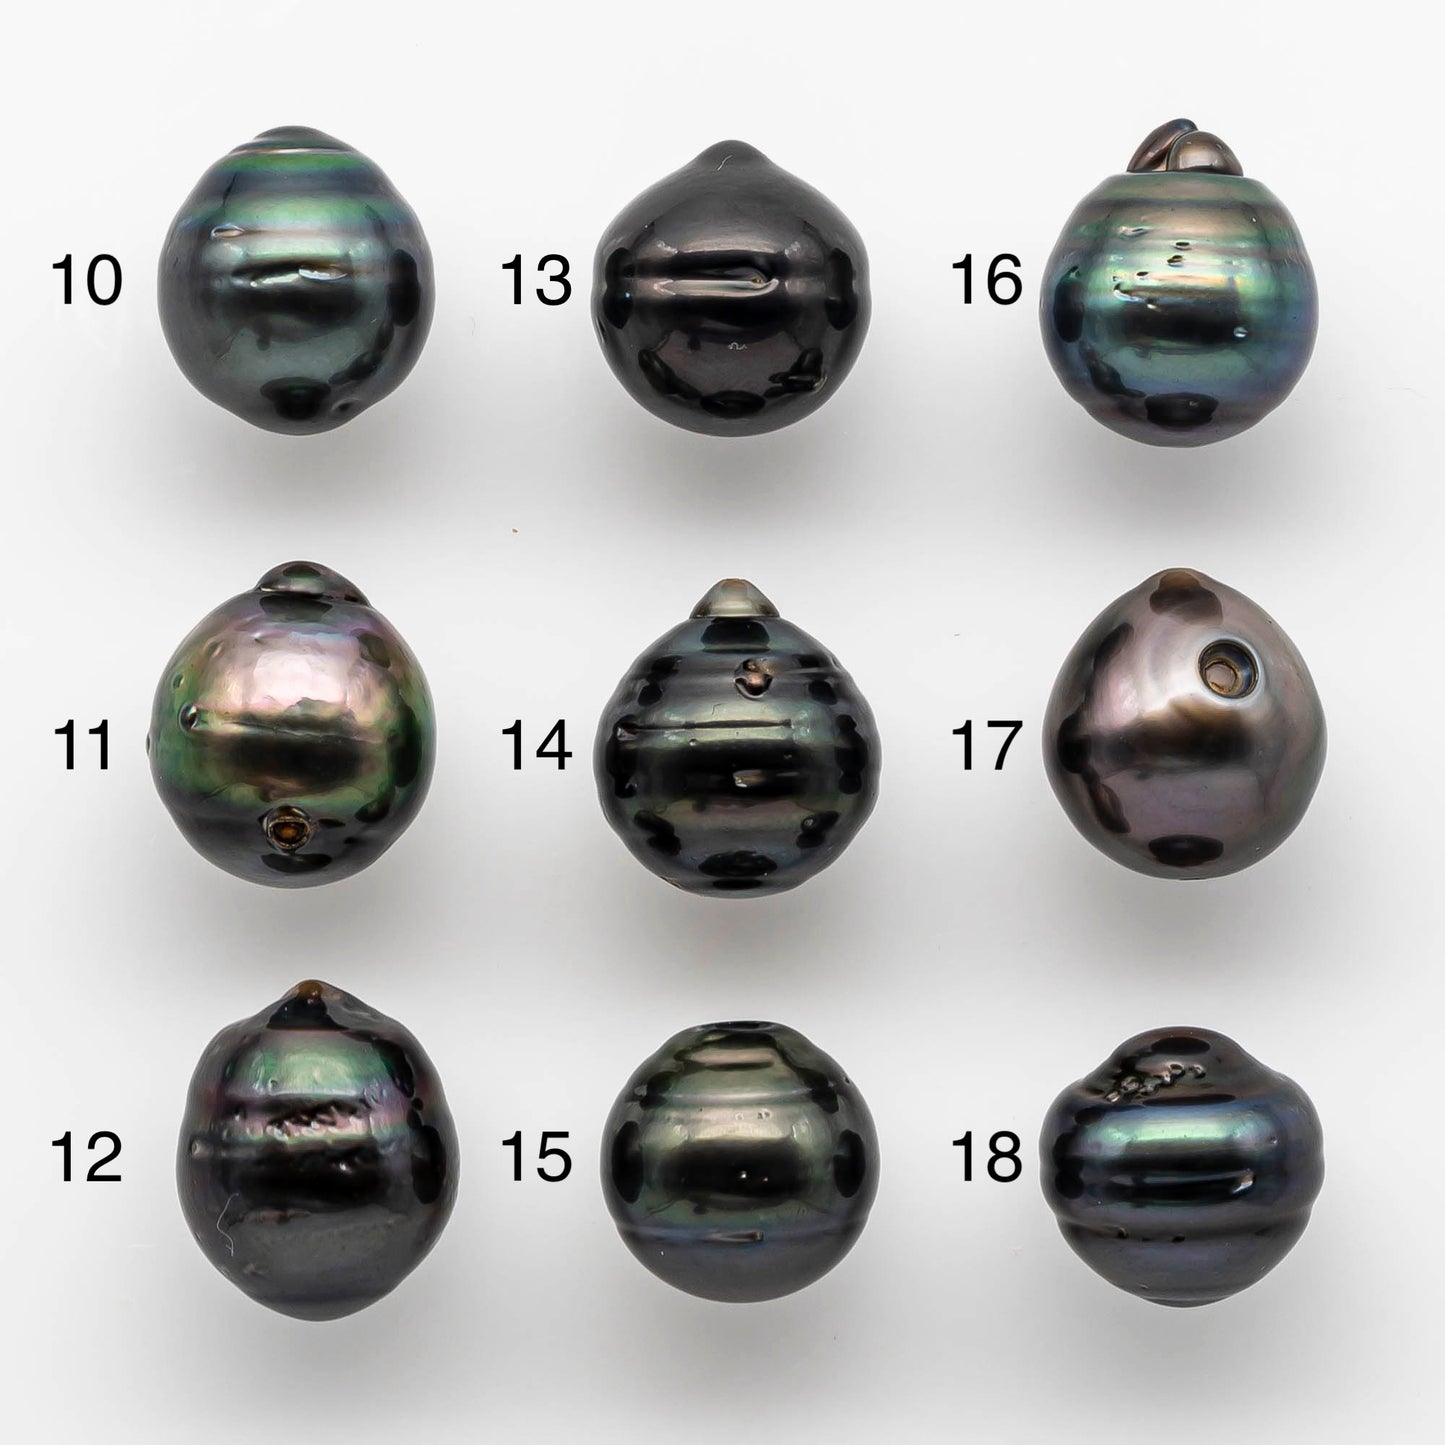 13-14mm Tahitian Pearl Drop Undrilled Loose Single Piece in High Luster and Natural Color with Minor Blemishes, SKU # 1889TH